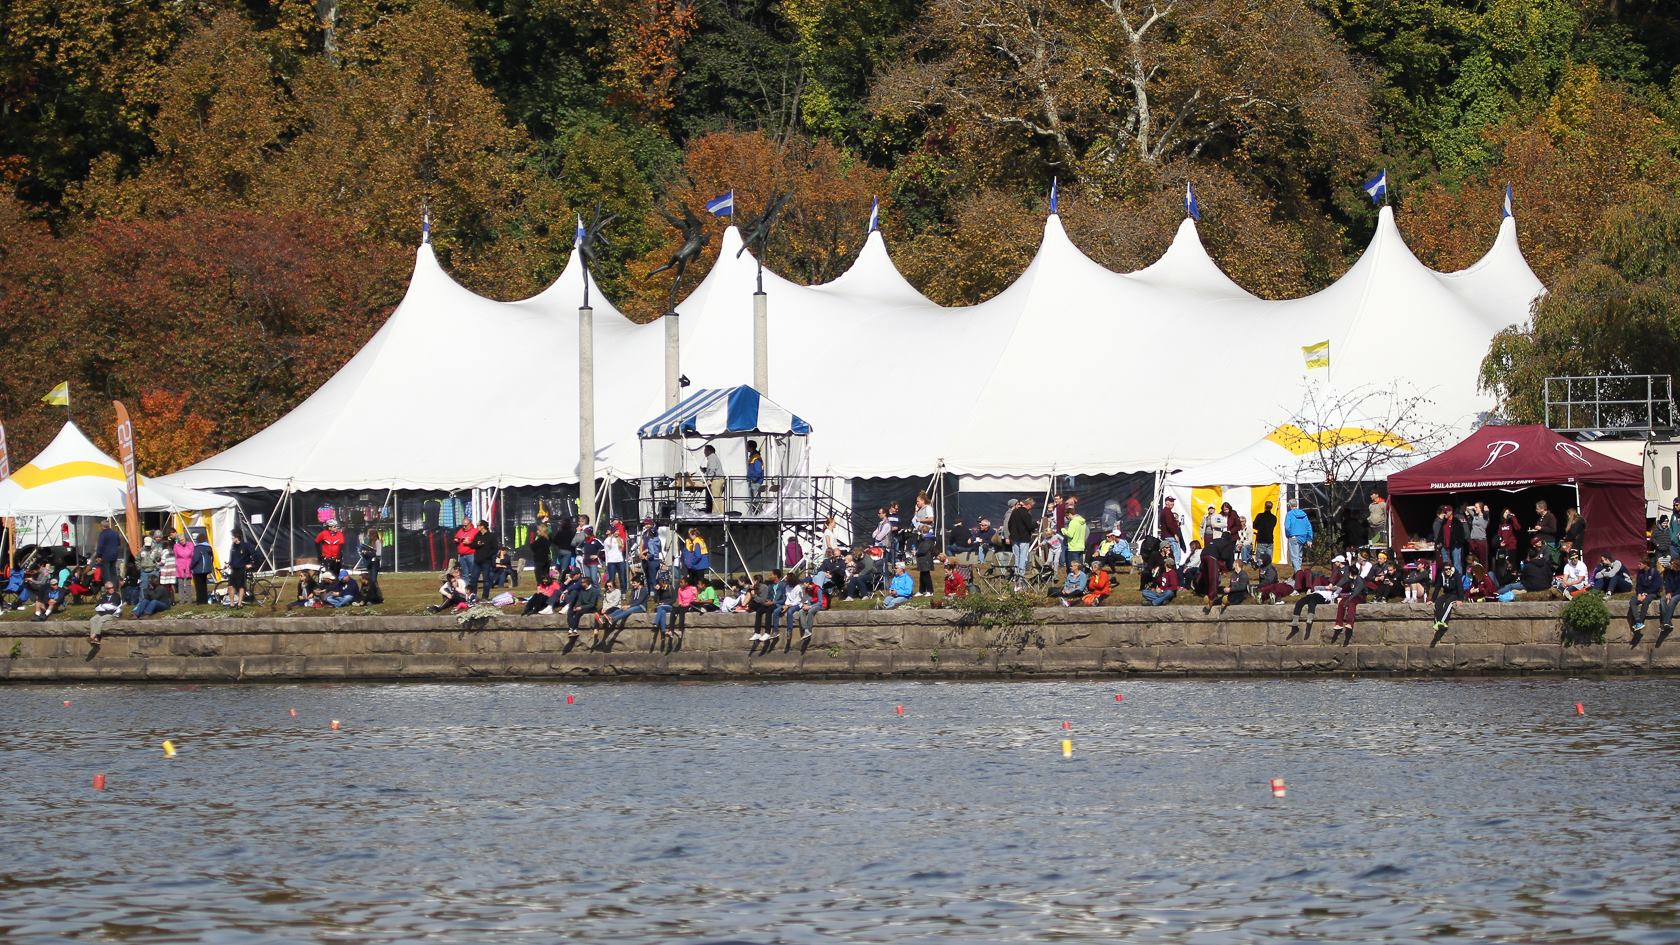 Tents at Fairmount Park for rowing event